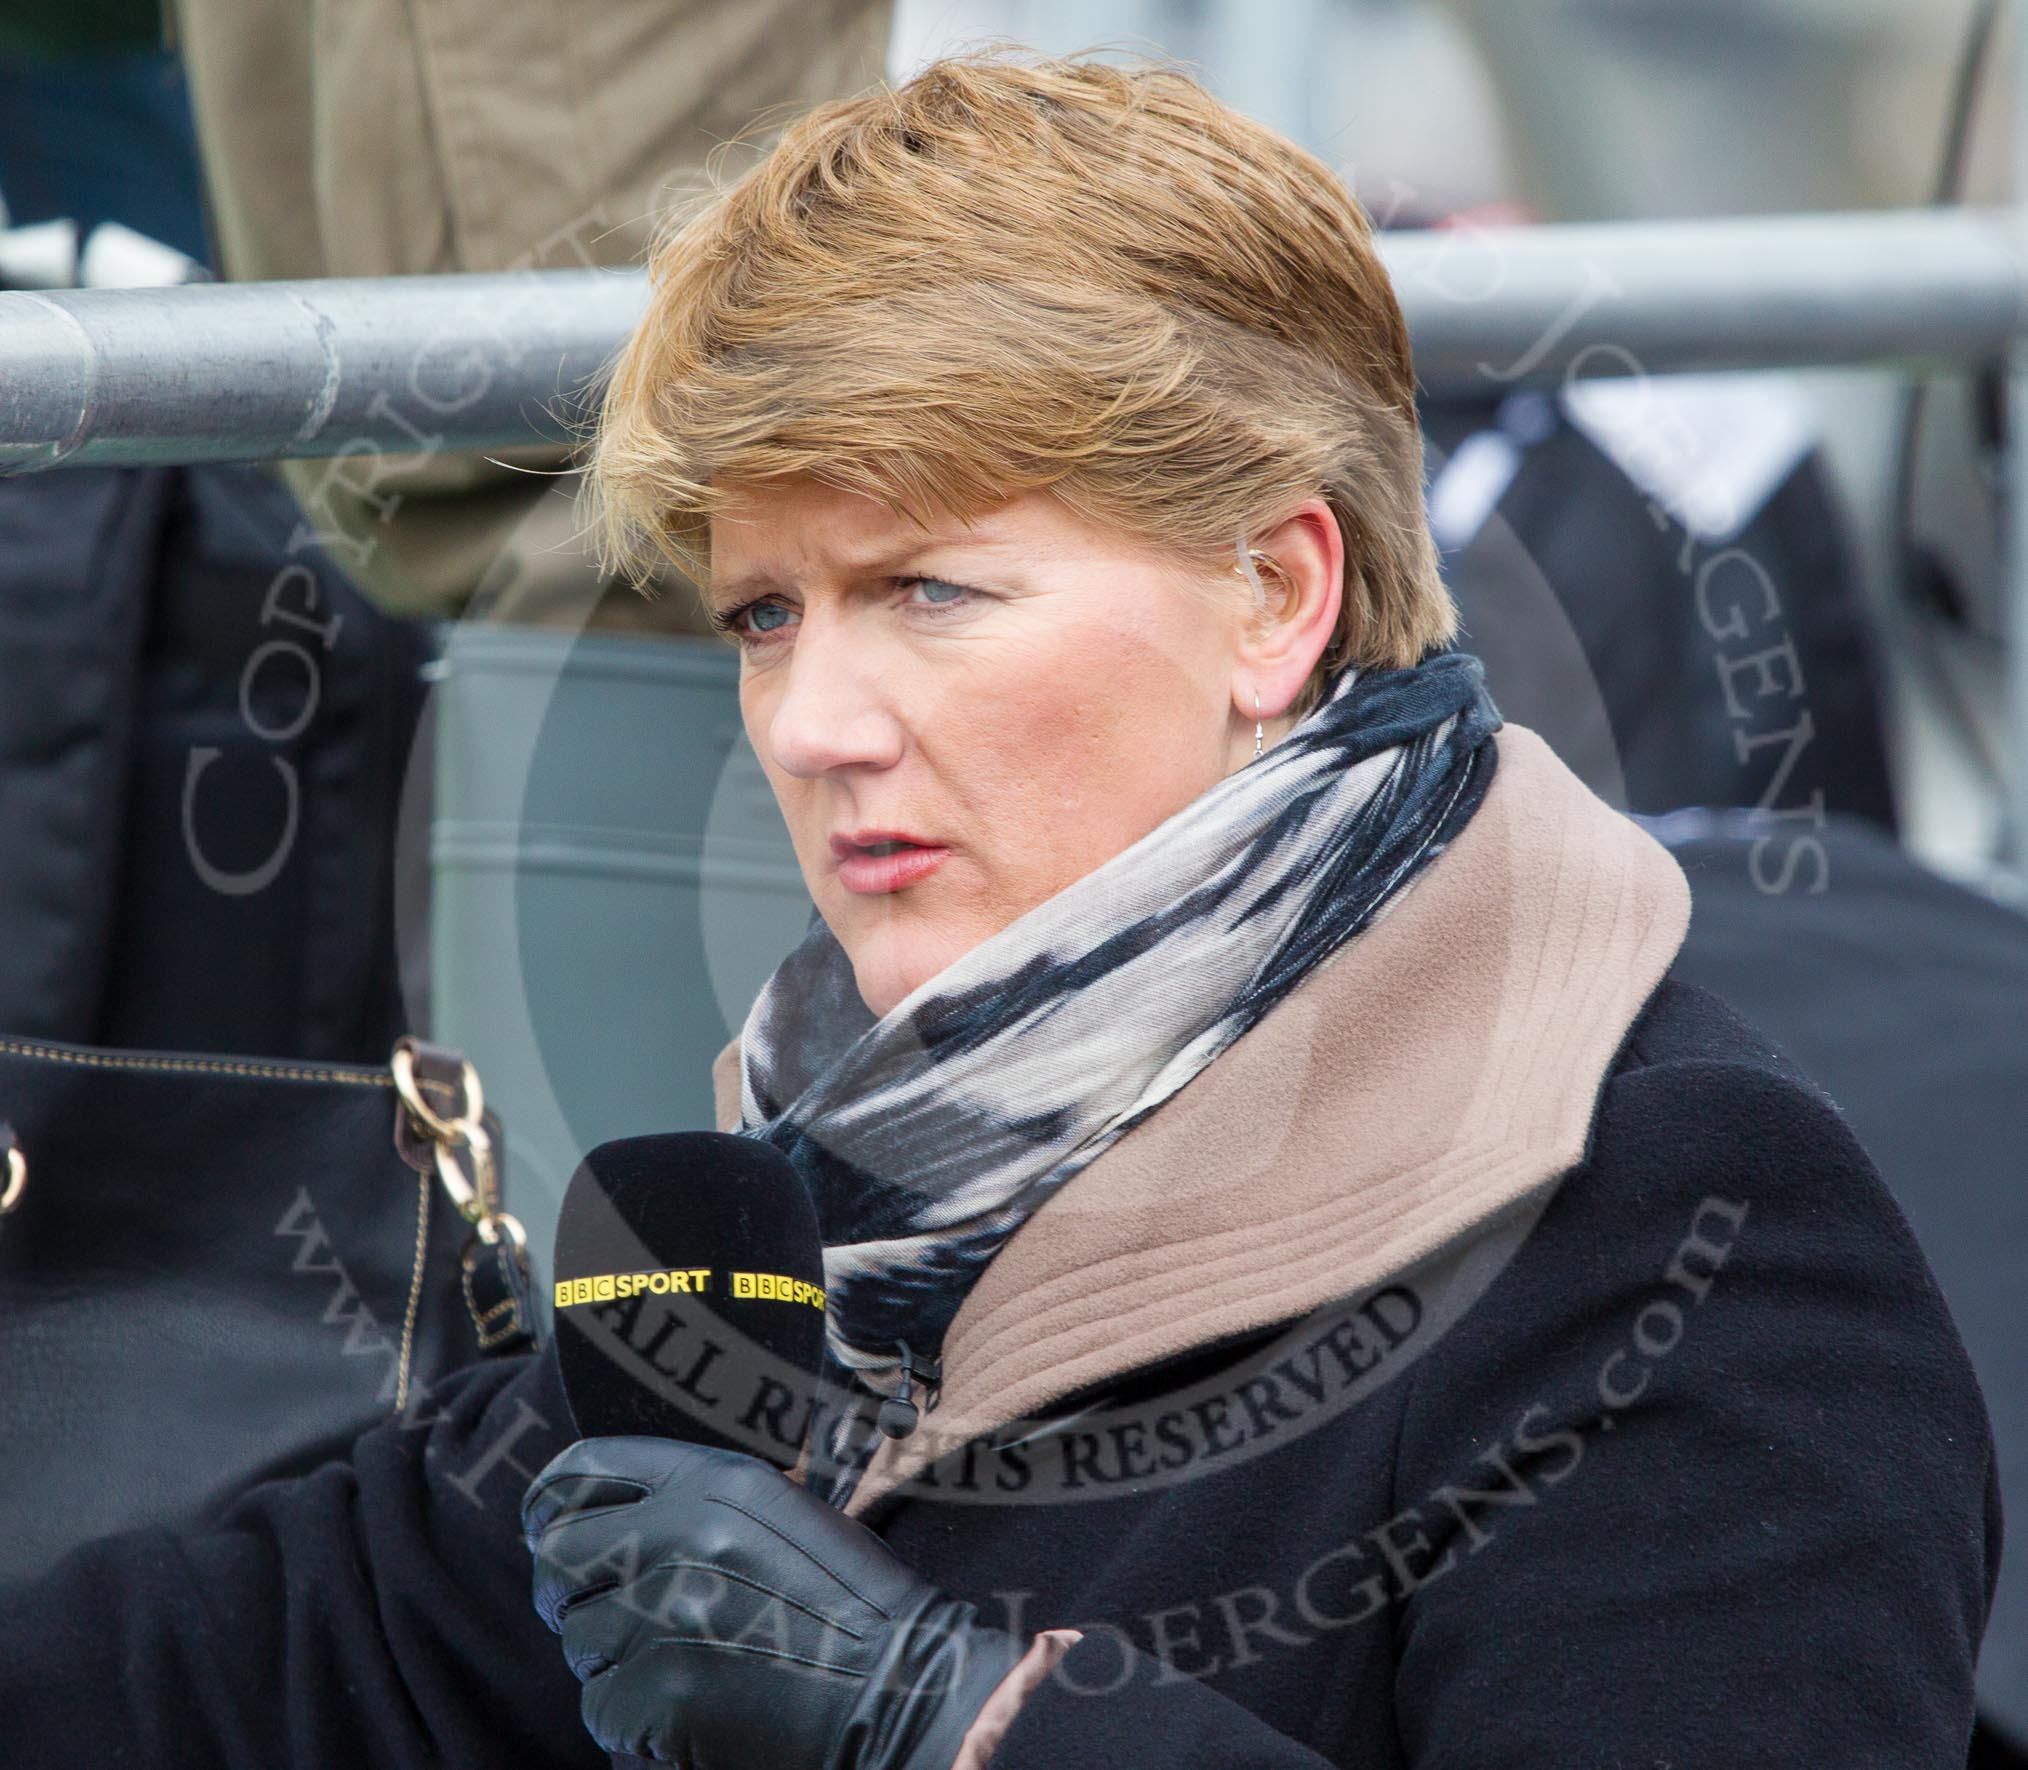 The Boat Race 2013: BBC Sport commentator Clare Balding at the toss for stations for the Boat Race 2013..
Putney,
London SW15,

United Kingdom,
on 31 March 2013 at 14:36, image #86